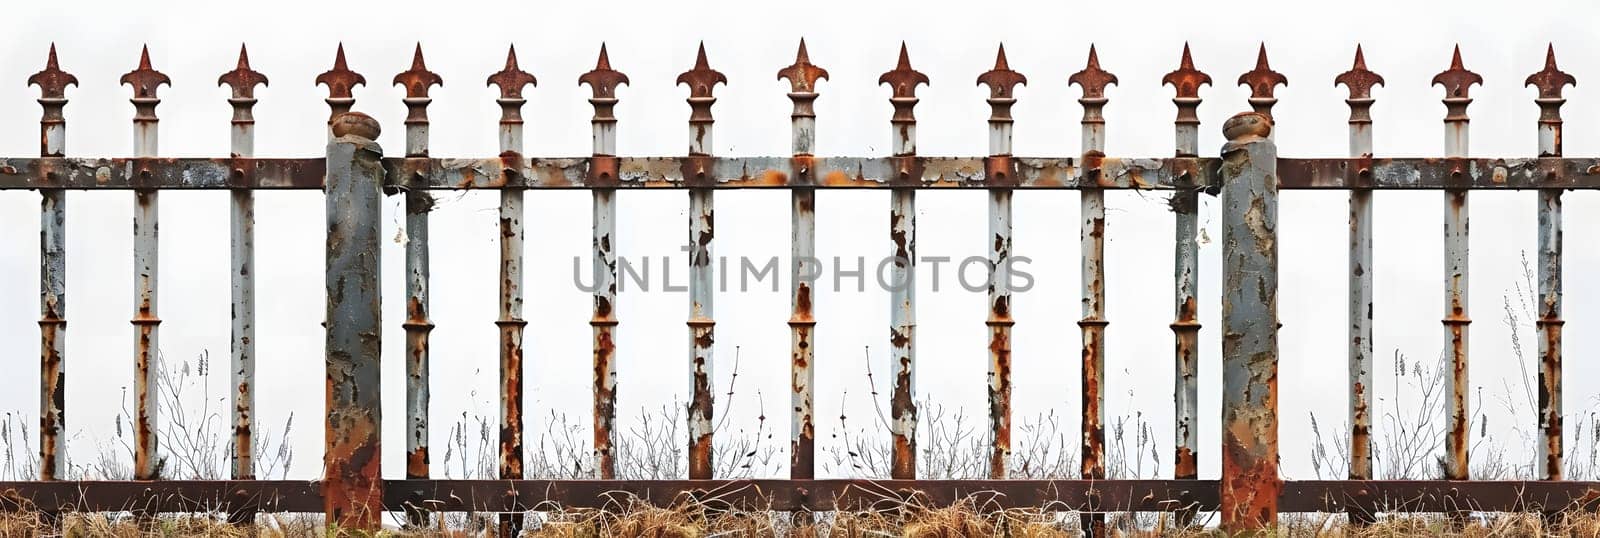 A product showcasing a picket fence design with crosses on a rusted metal surface, set against a clean white background. Perfect for home fencing projects